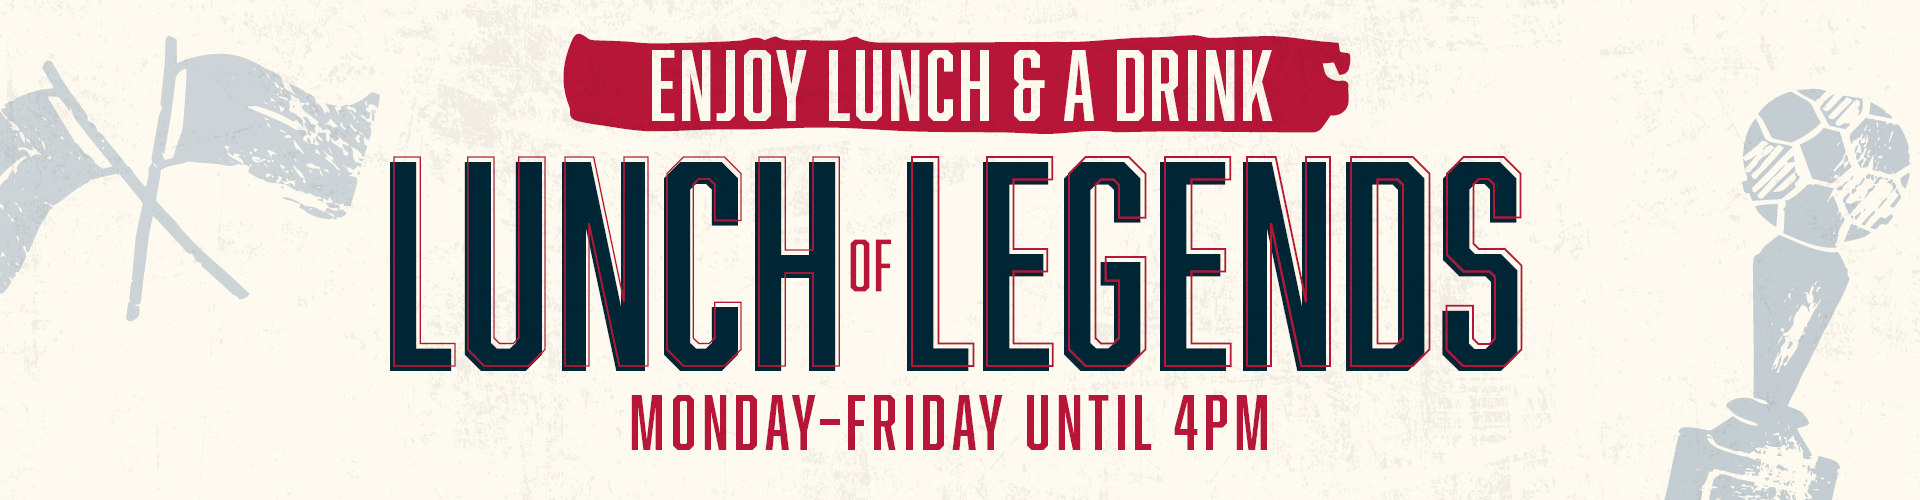 Enjoy lunch & a Drink Monday - Friday 4pm